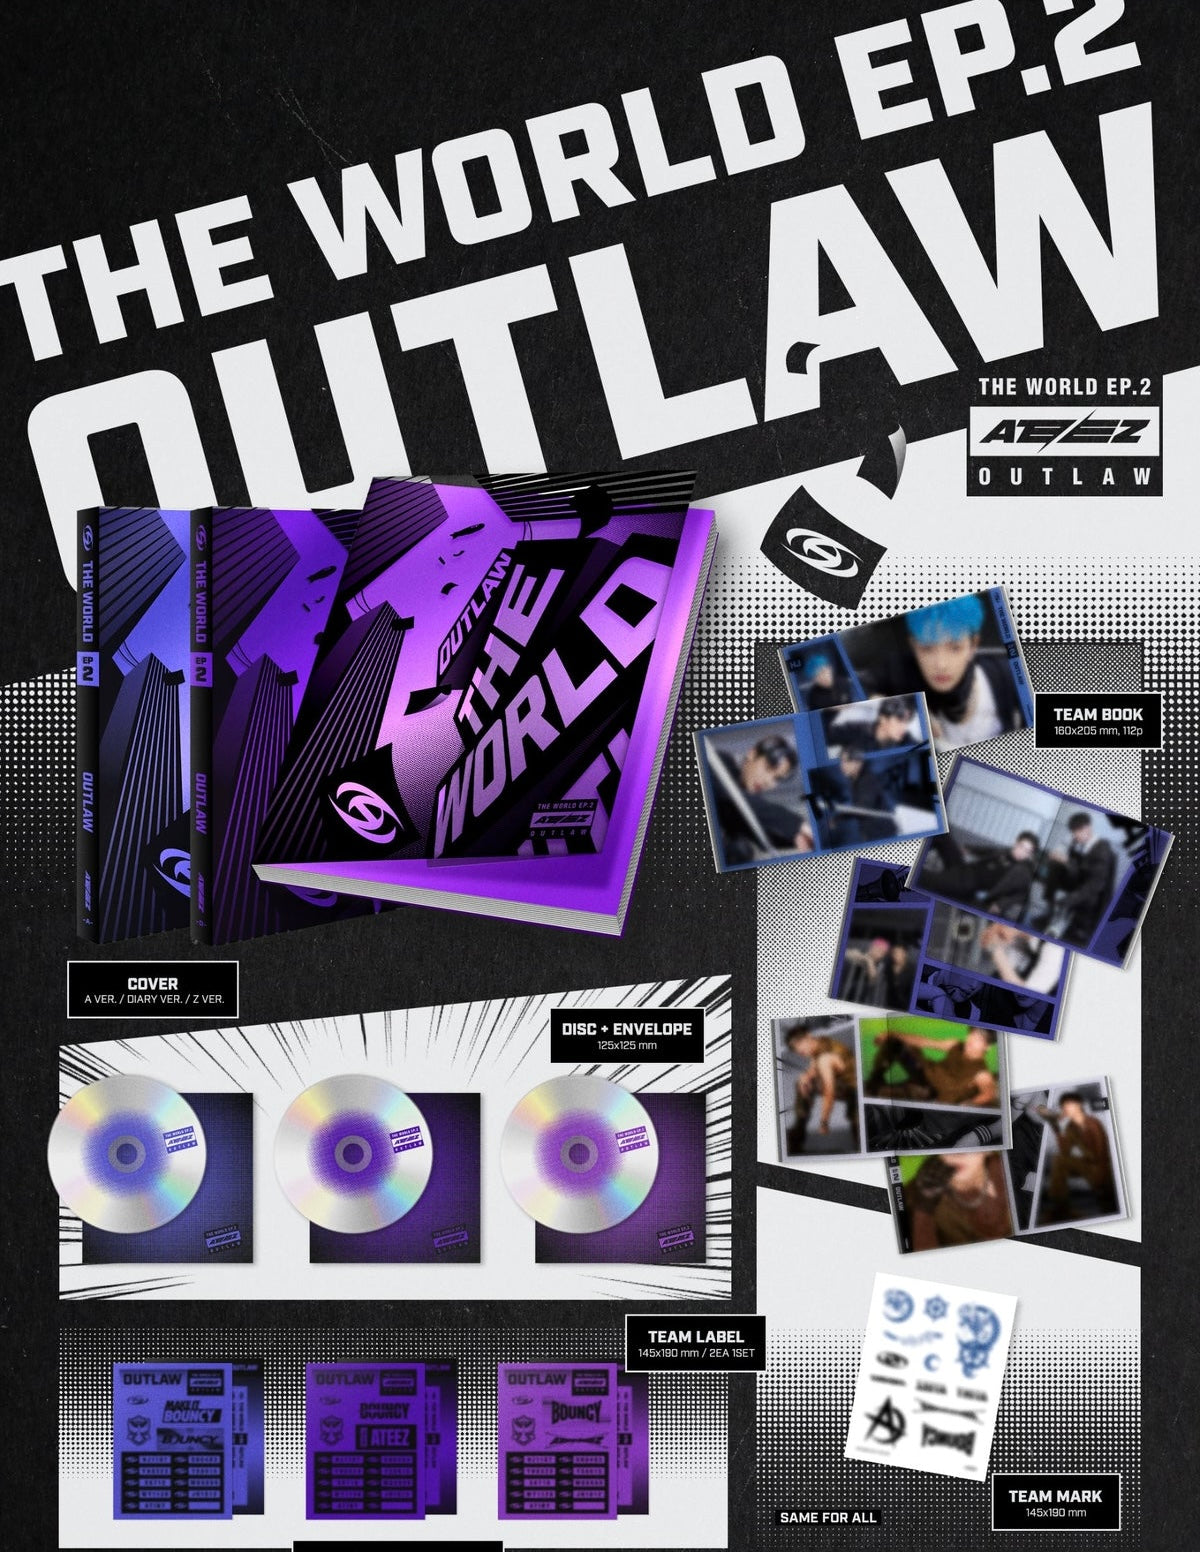 Ateez - The World EP.2 : Outlaw